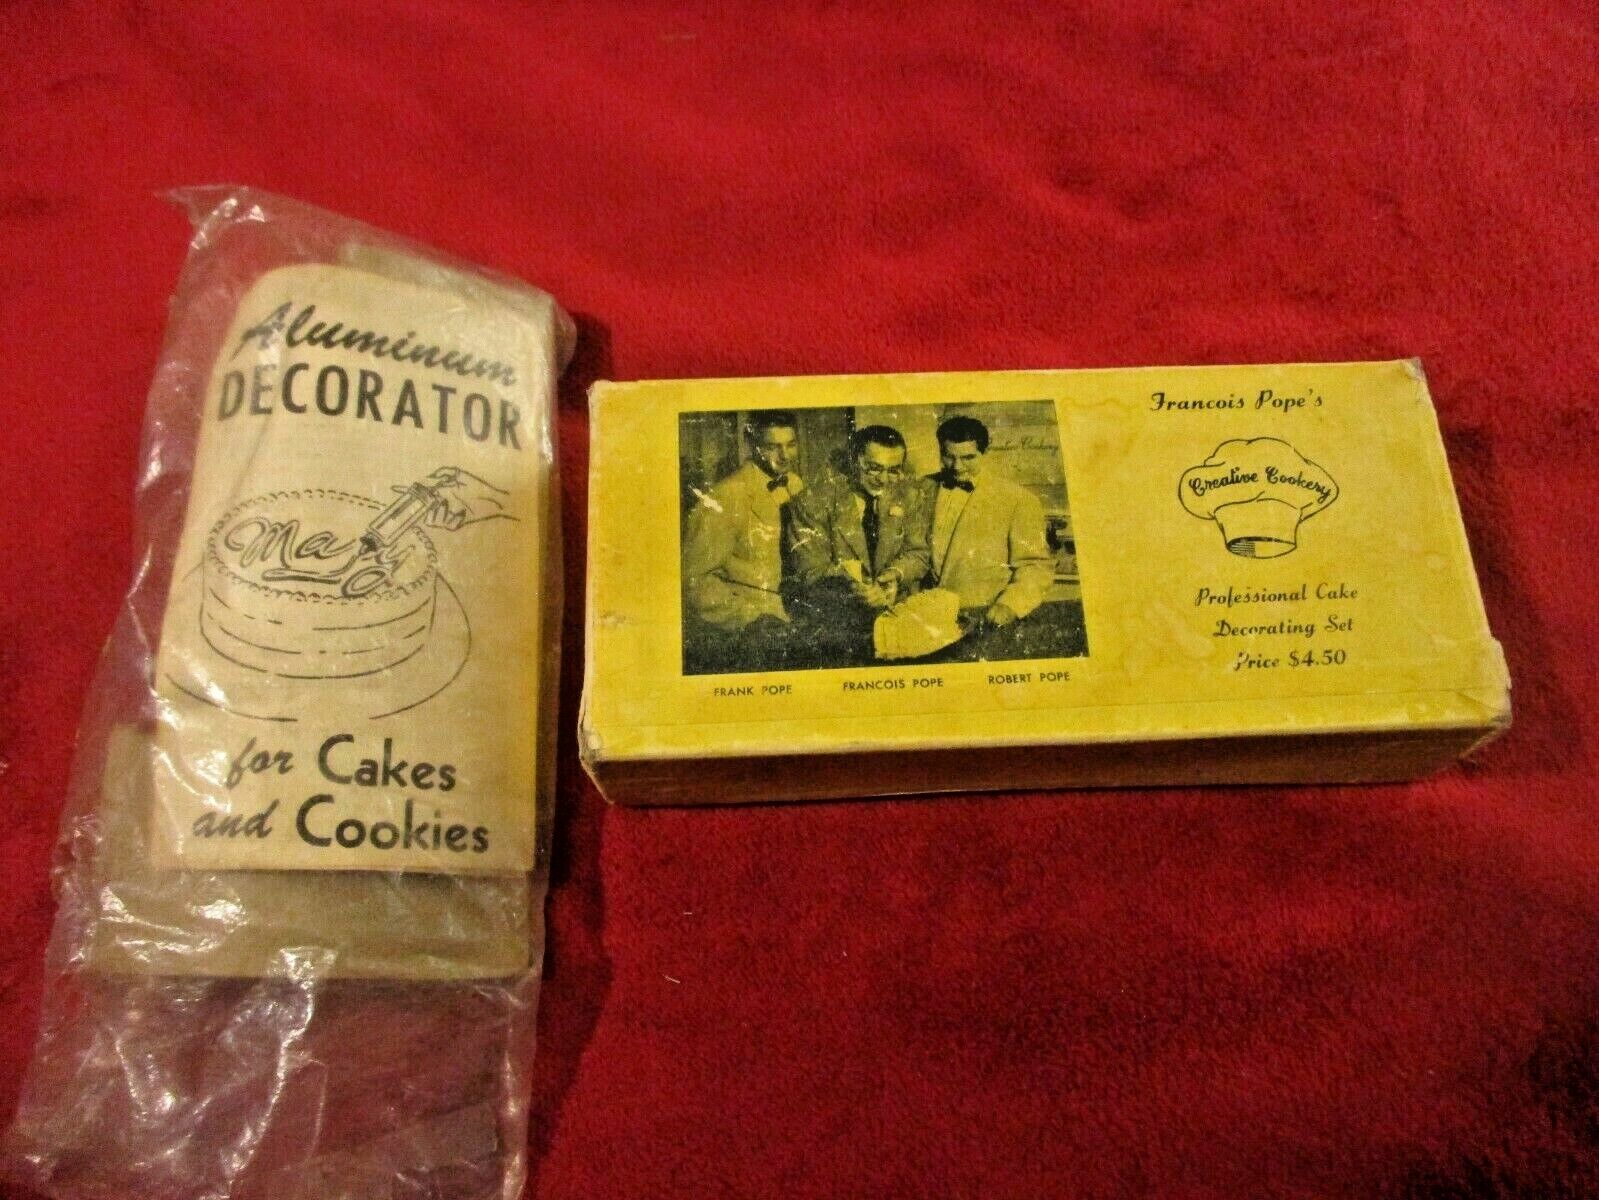 Vintage Creative Cookery Francois Pope\'s Professional Cake Decorating Set + More